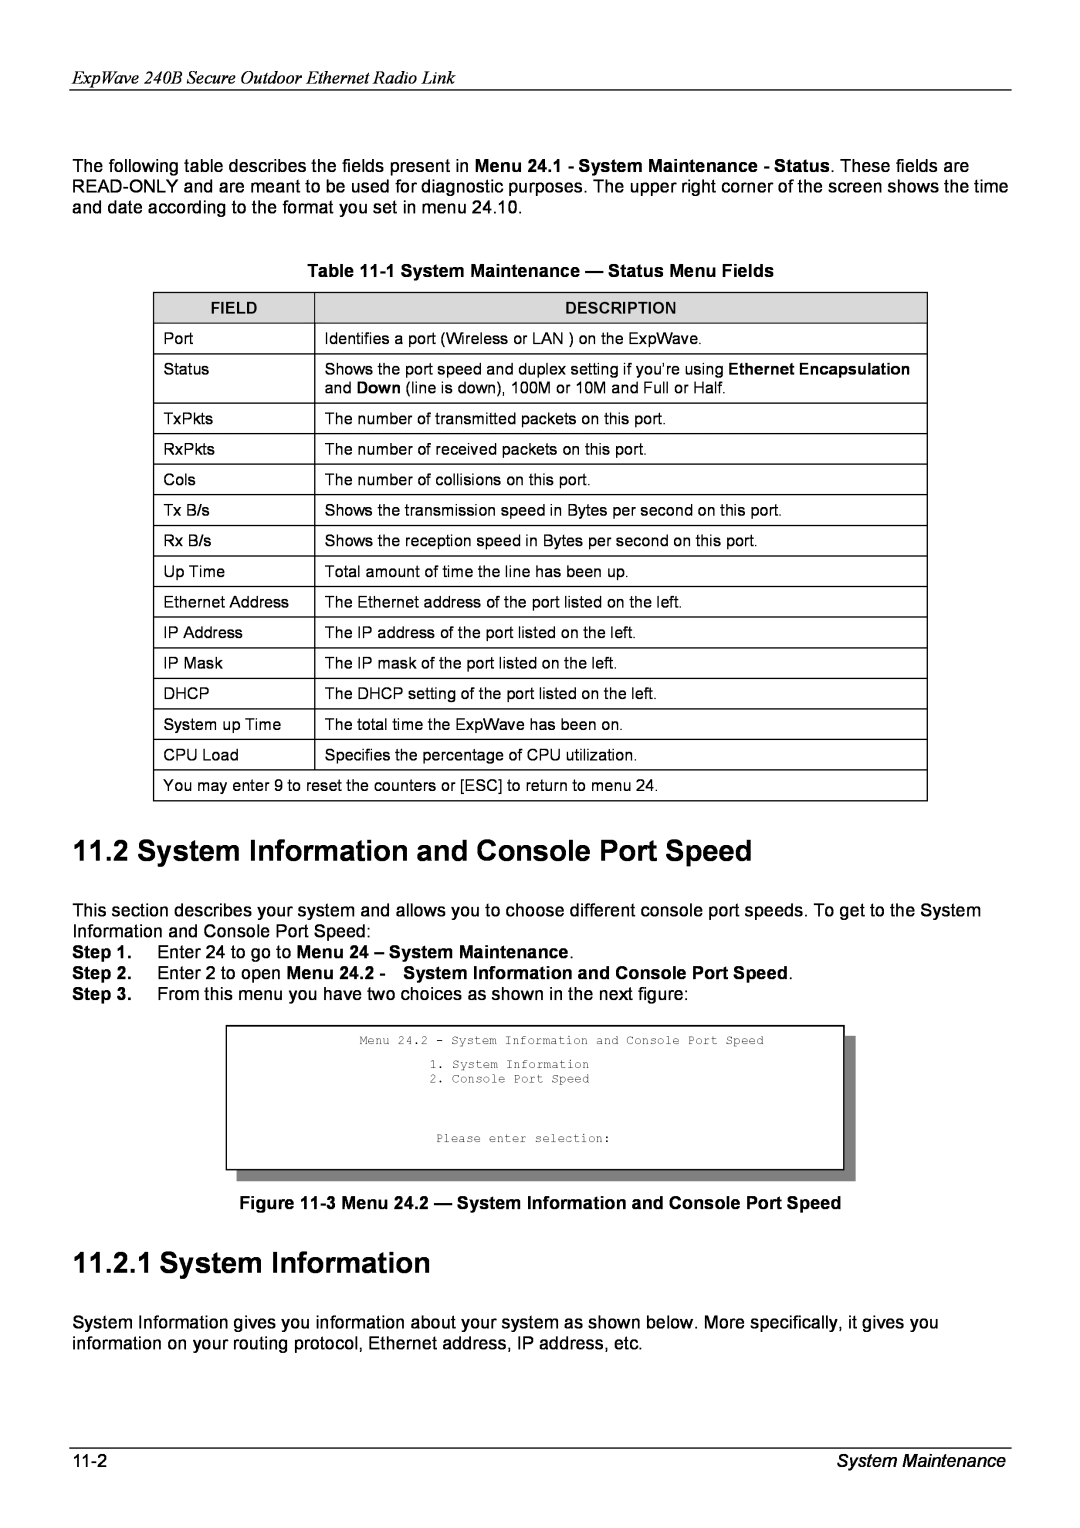 ZyXEL Communications manual System Information and Console Port Speed, ExpWave 240B Secure Outdoor Ethernet Radio Link 